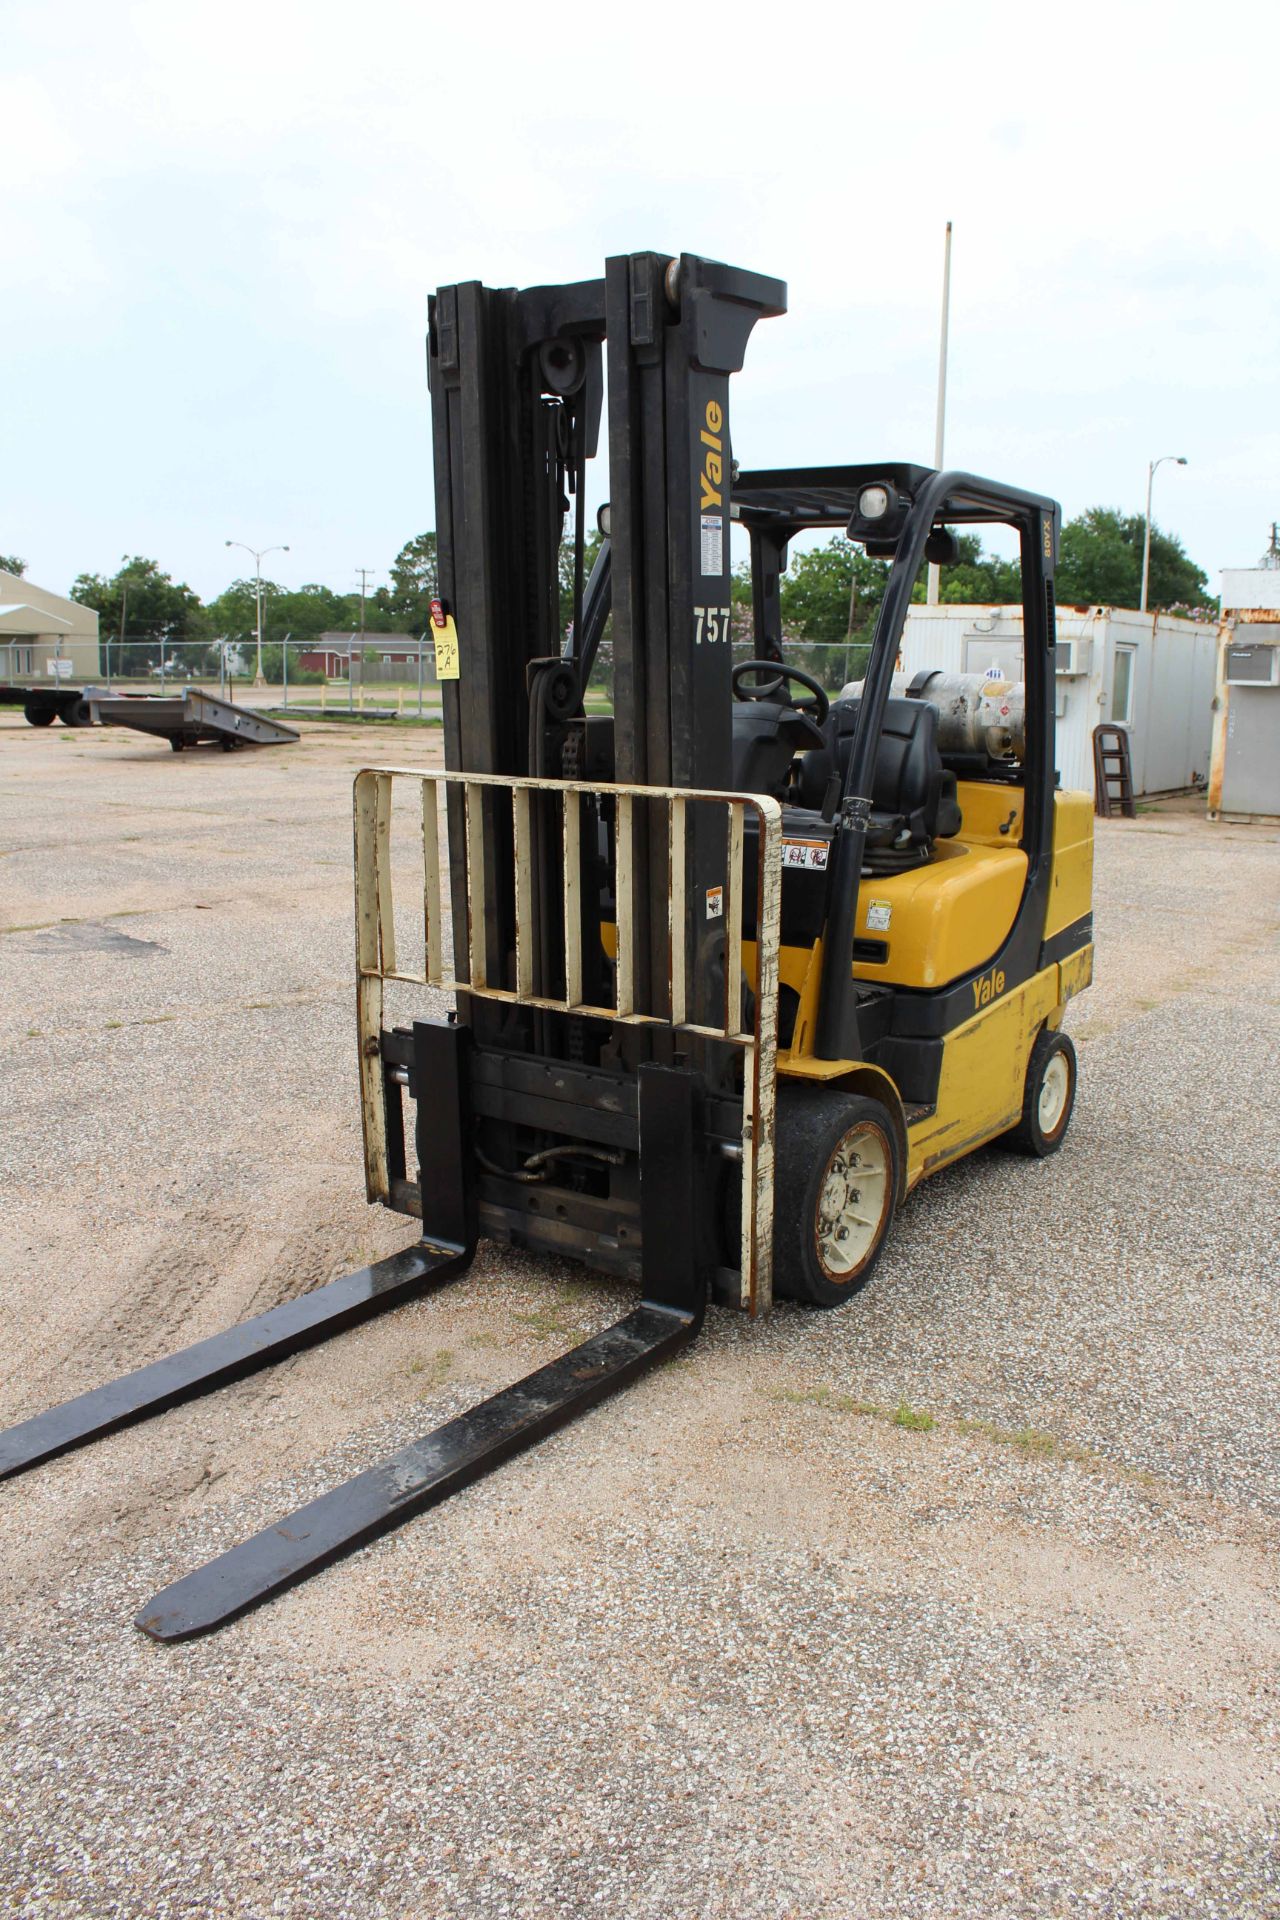 FORKLIFT, YALE 8,000 LB. CAP. MDL. GLC080VXNSE100, new 2011, LPG, 100" triple stage mast, 218" - Image 2 of 6